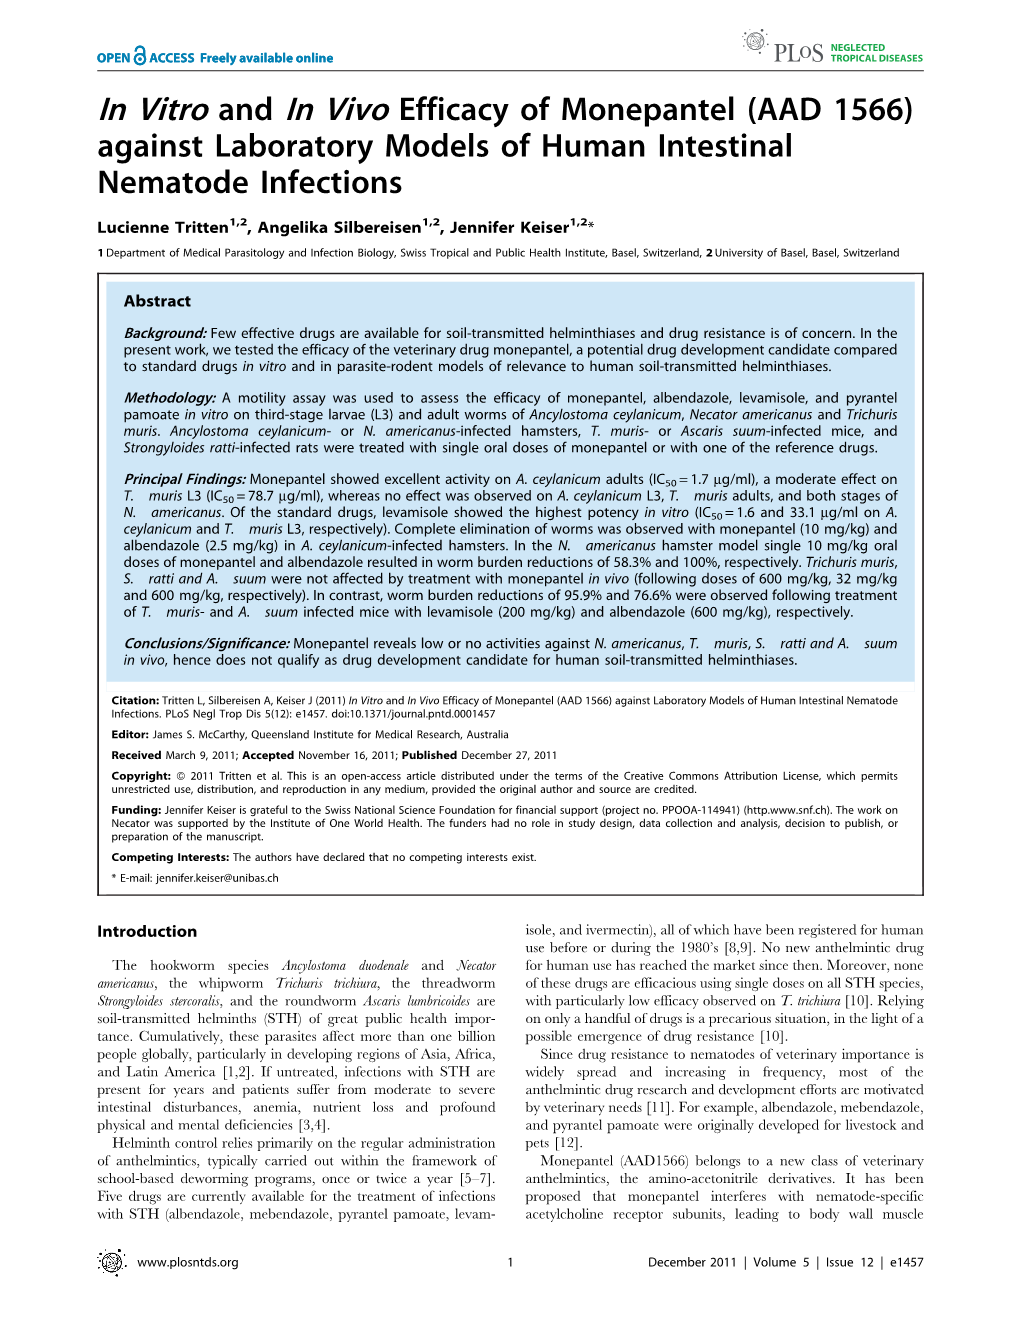 Against Laboratory Models of Human Intestinal Nematode Infections